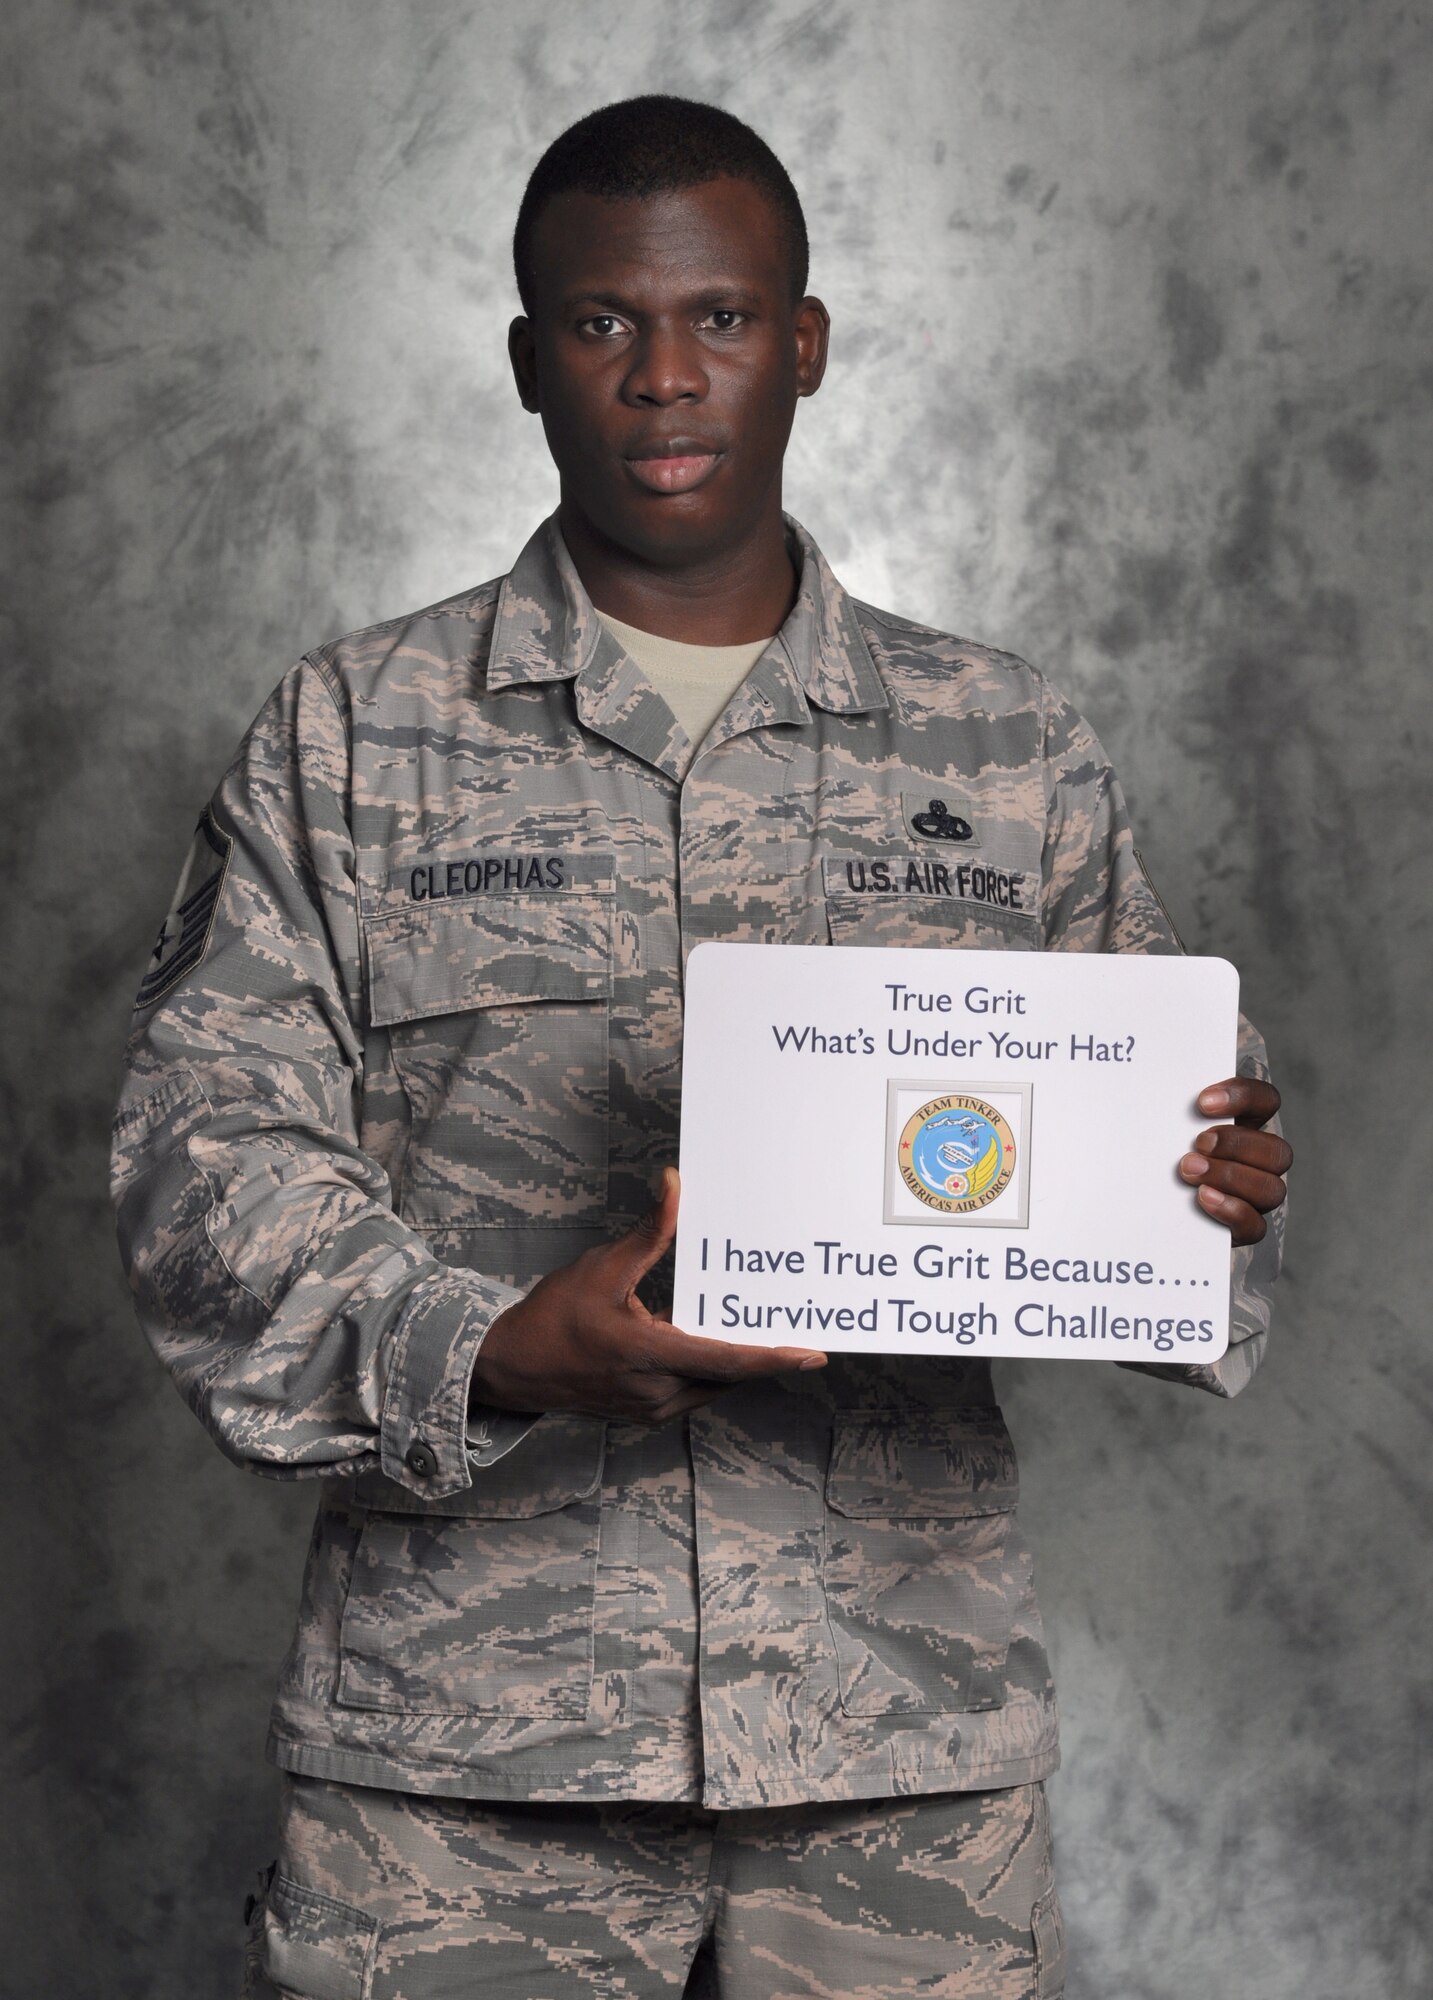 Master Sgt. Shawn Cleophas proves he has True Grit through persevering through the obstacles in life and also for choosing to seek help. Cleophas is a member of the 552nd Maintenance Group. (U.S. Air Force photo/Kelly White)